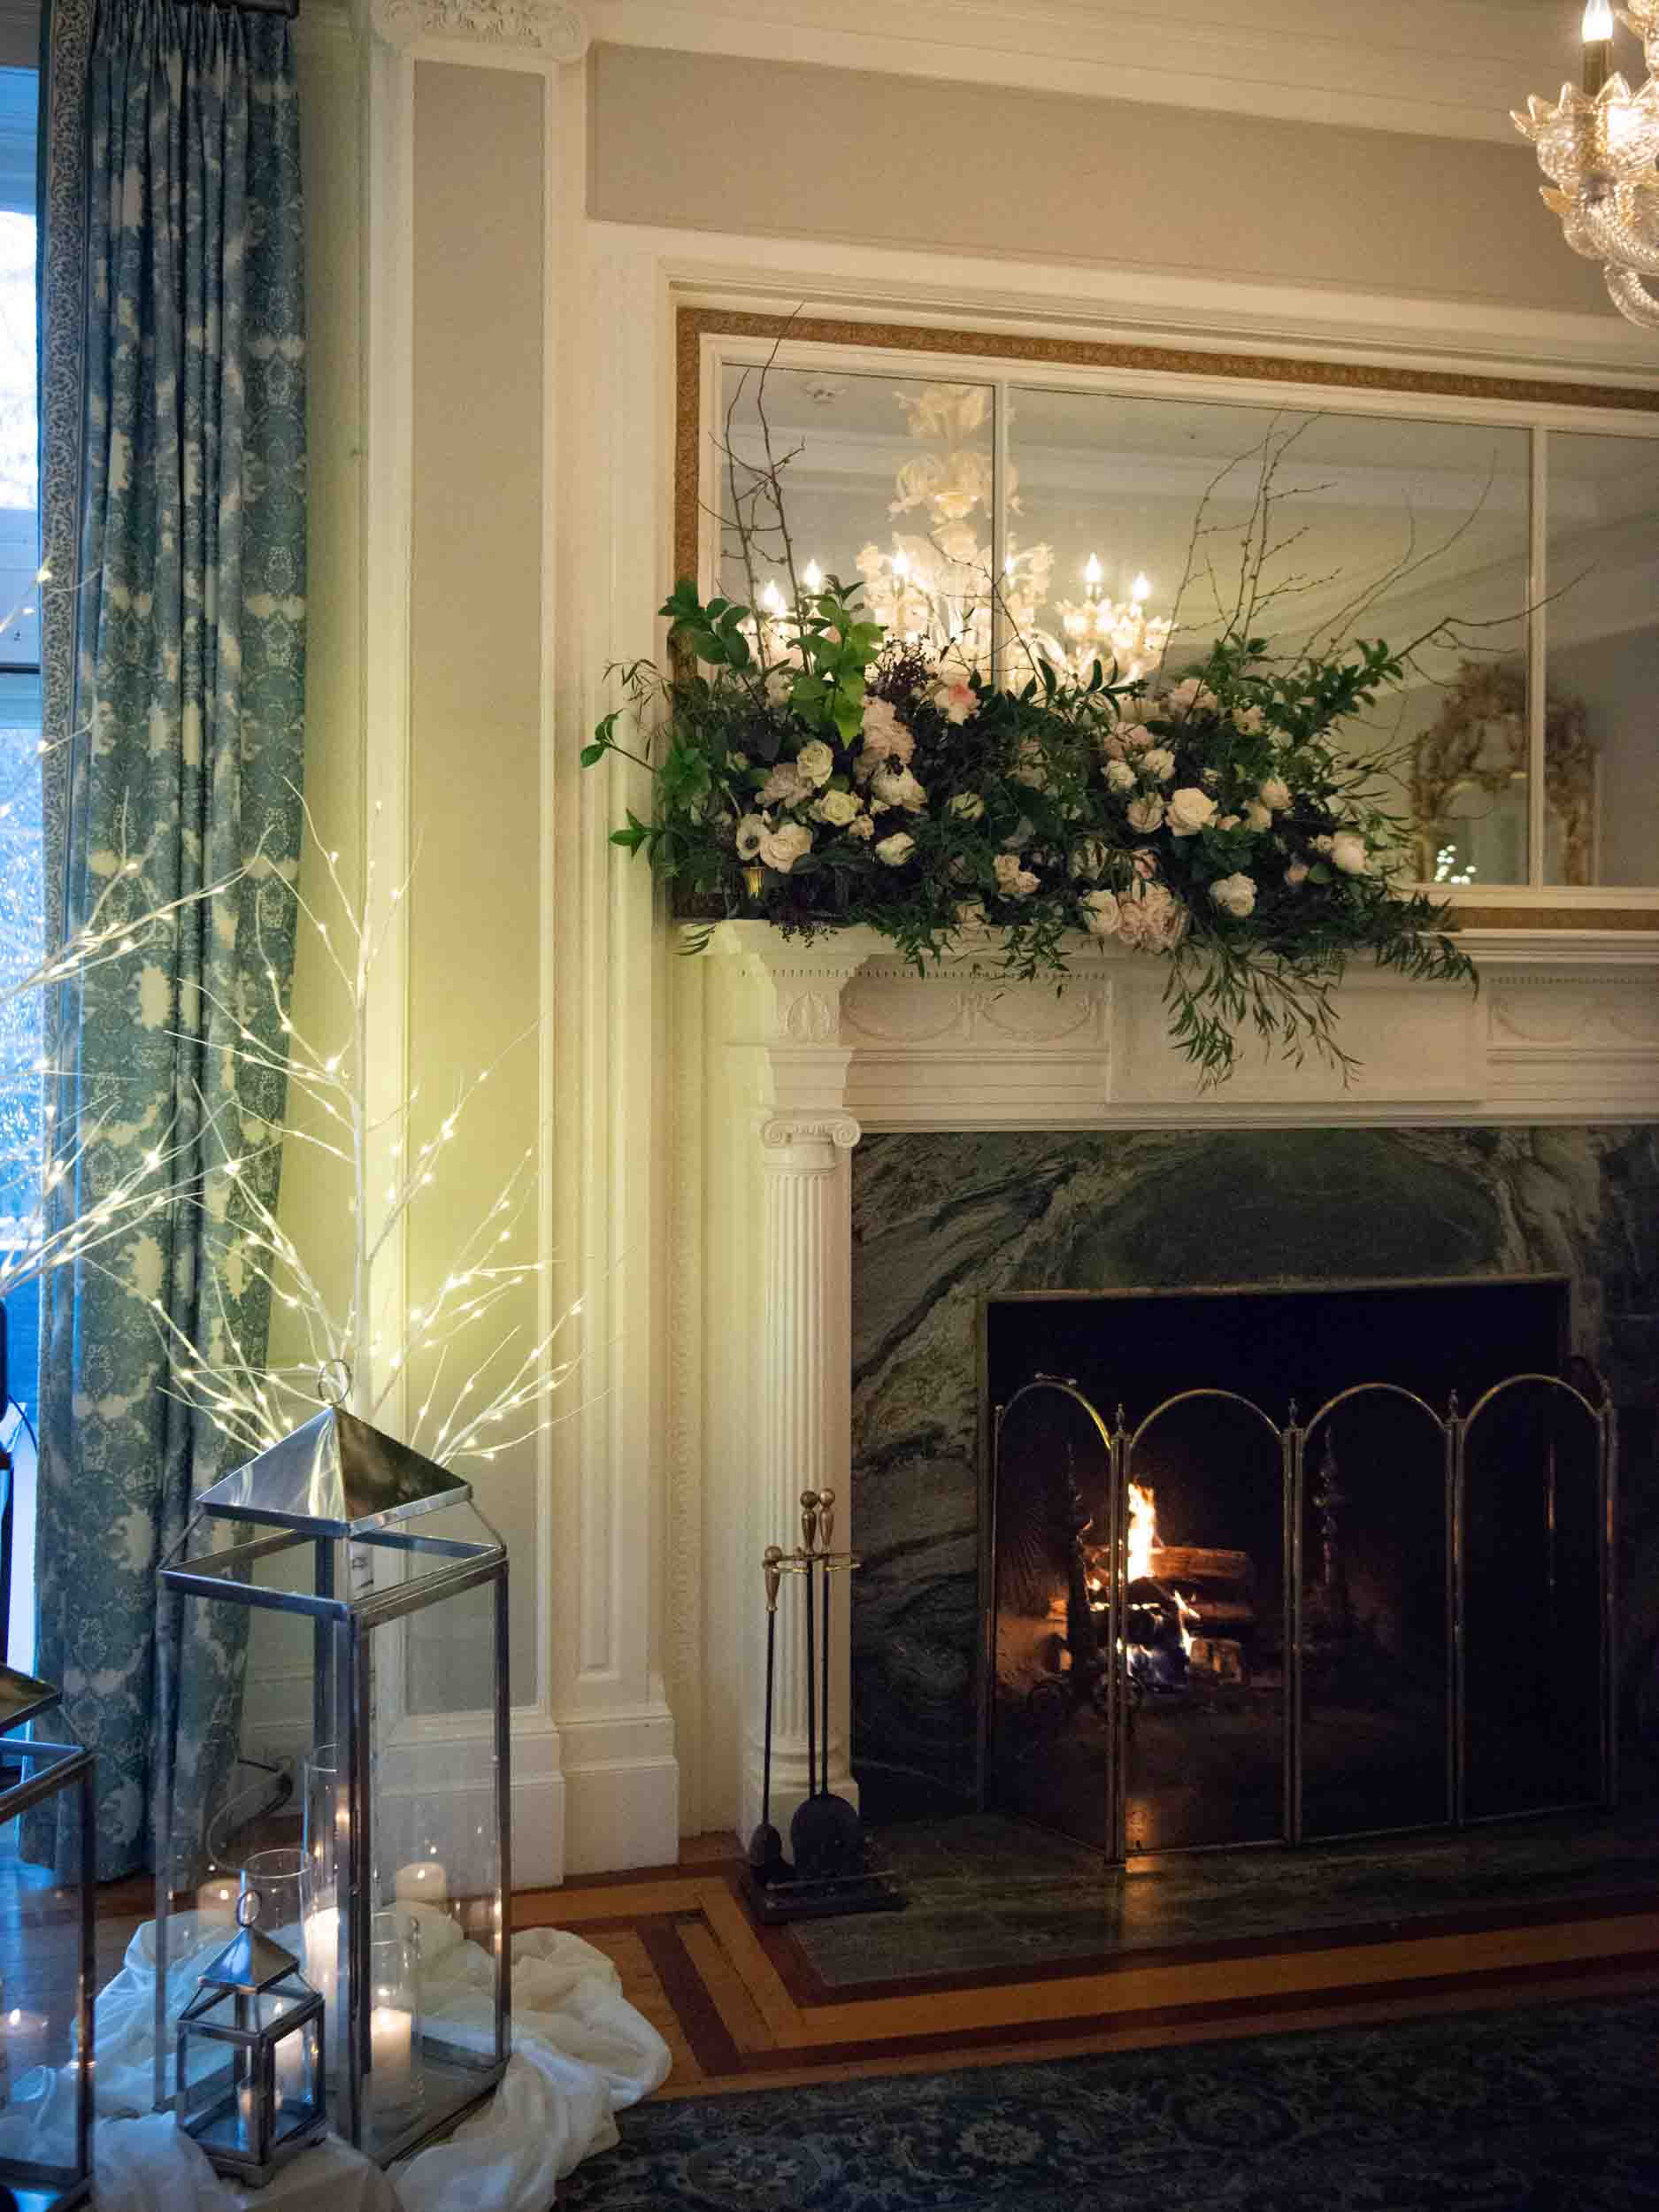 Cluster of white birch trees with sparkly lights, lanterns and candles, next to green marble fireplace with beautiful white, pink and green florals on the mantle